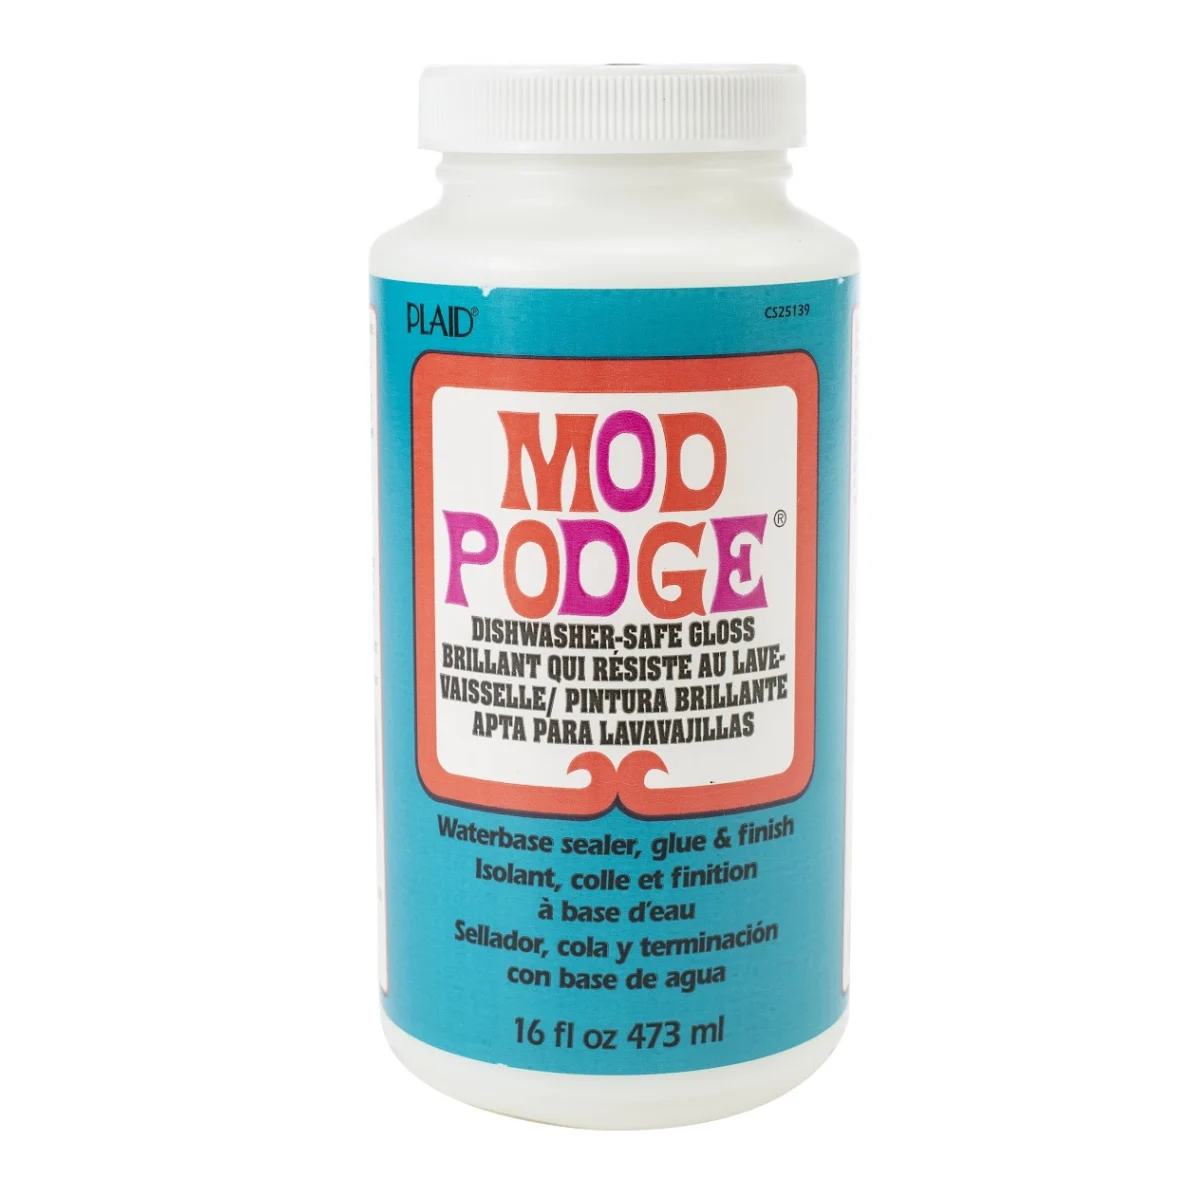 Where to Buy Mod Podge: Your Complete Guide - Mod Podge Rocks